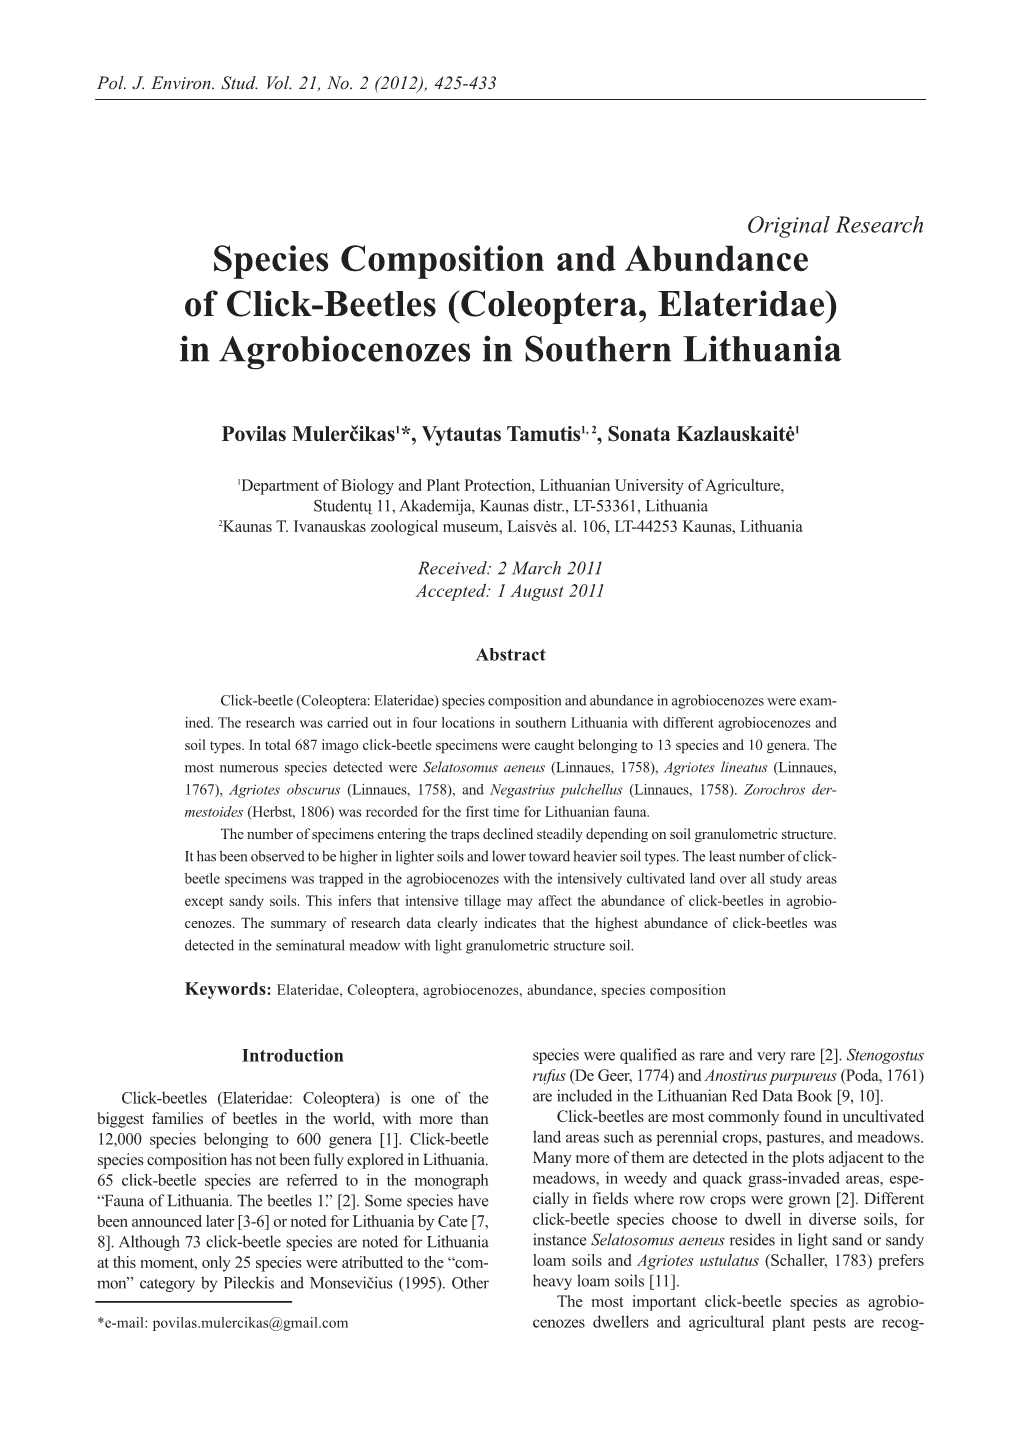 Species Composition and Abundance of Click-Beetles (Coleoptera, Elateridae) in Agrobiocenozes in Southern Lithuania